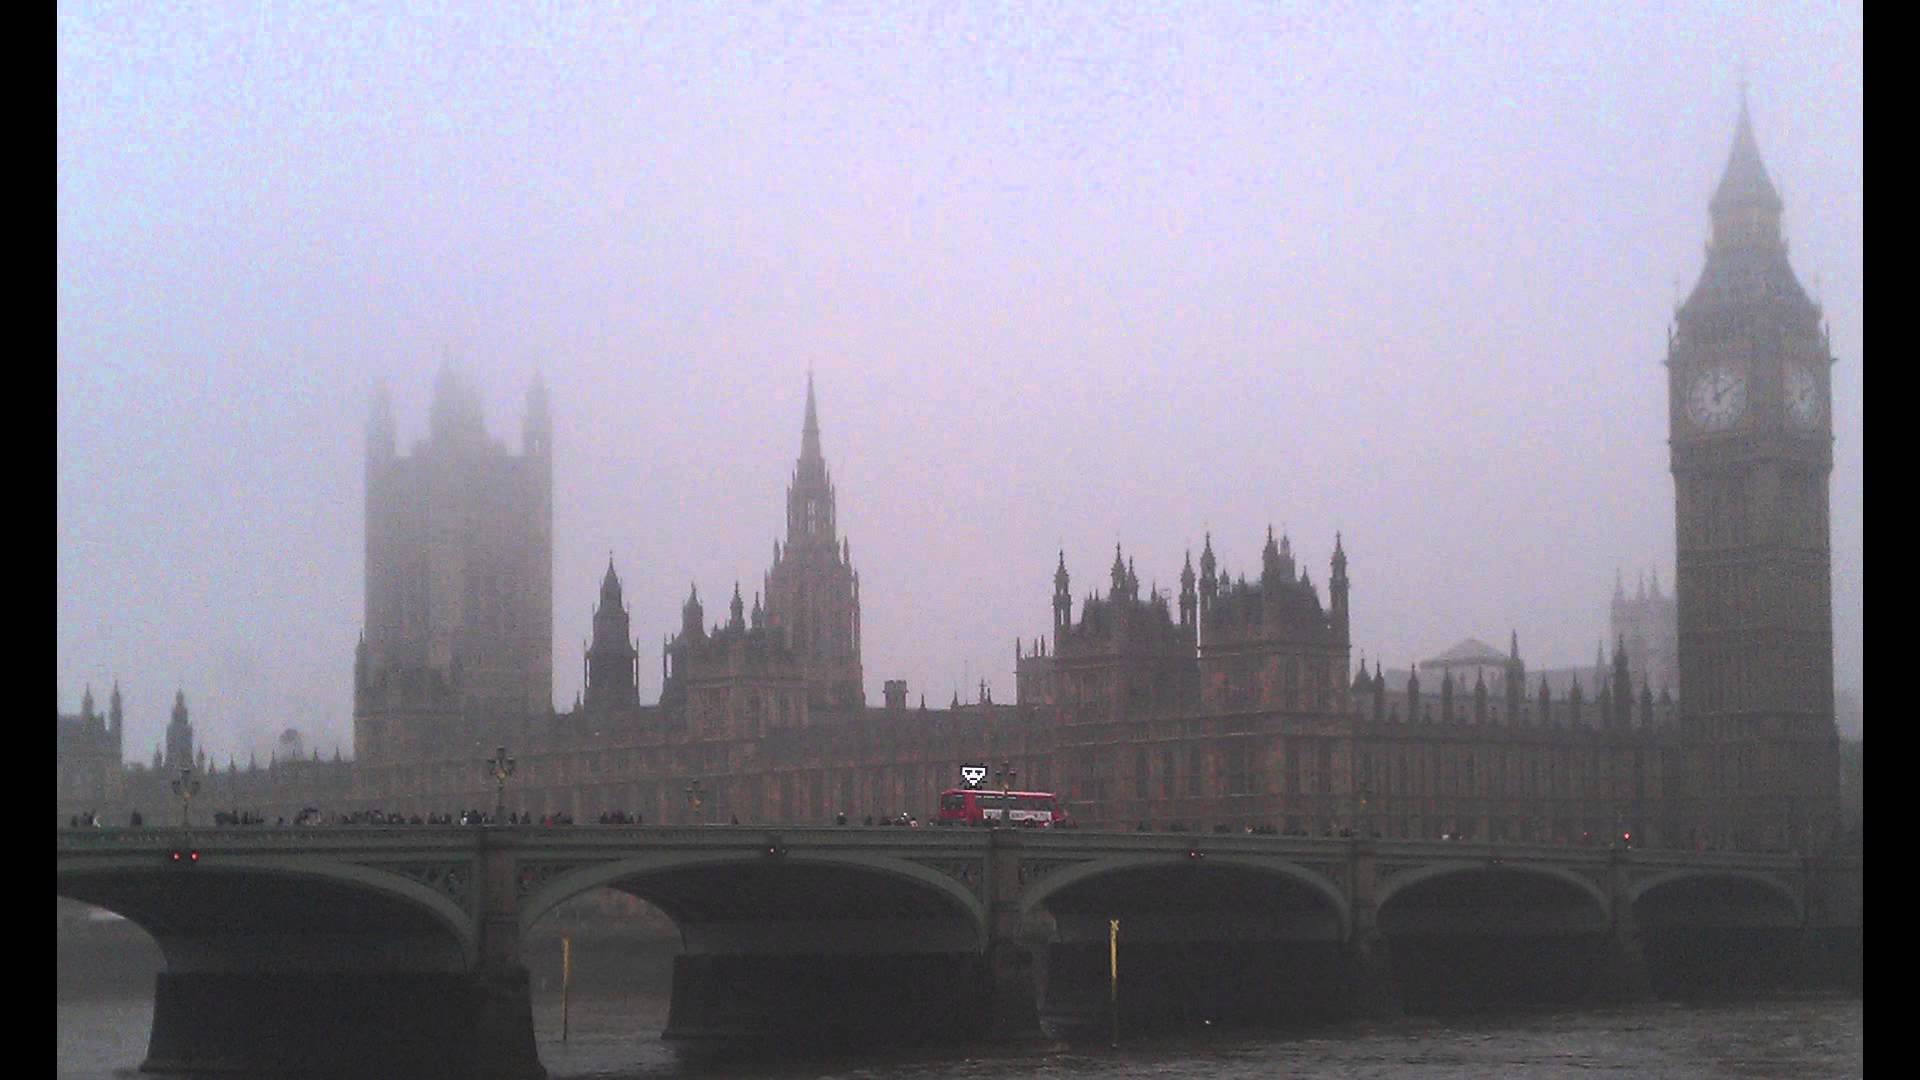 Foggy Day In London Wallpaper - Houses Of Parliament - HD Wallpaper 